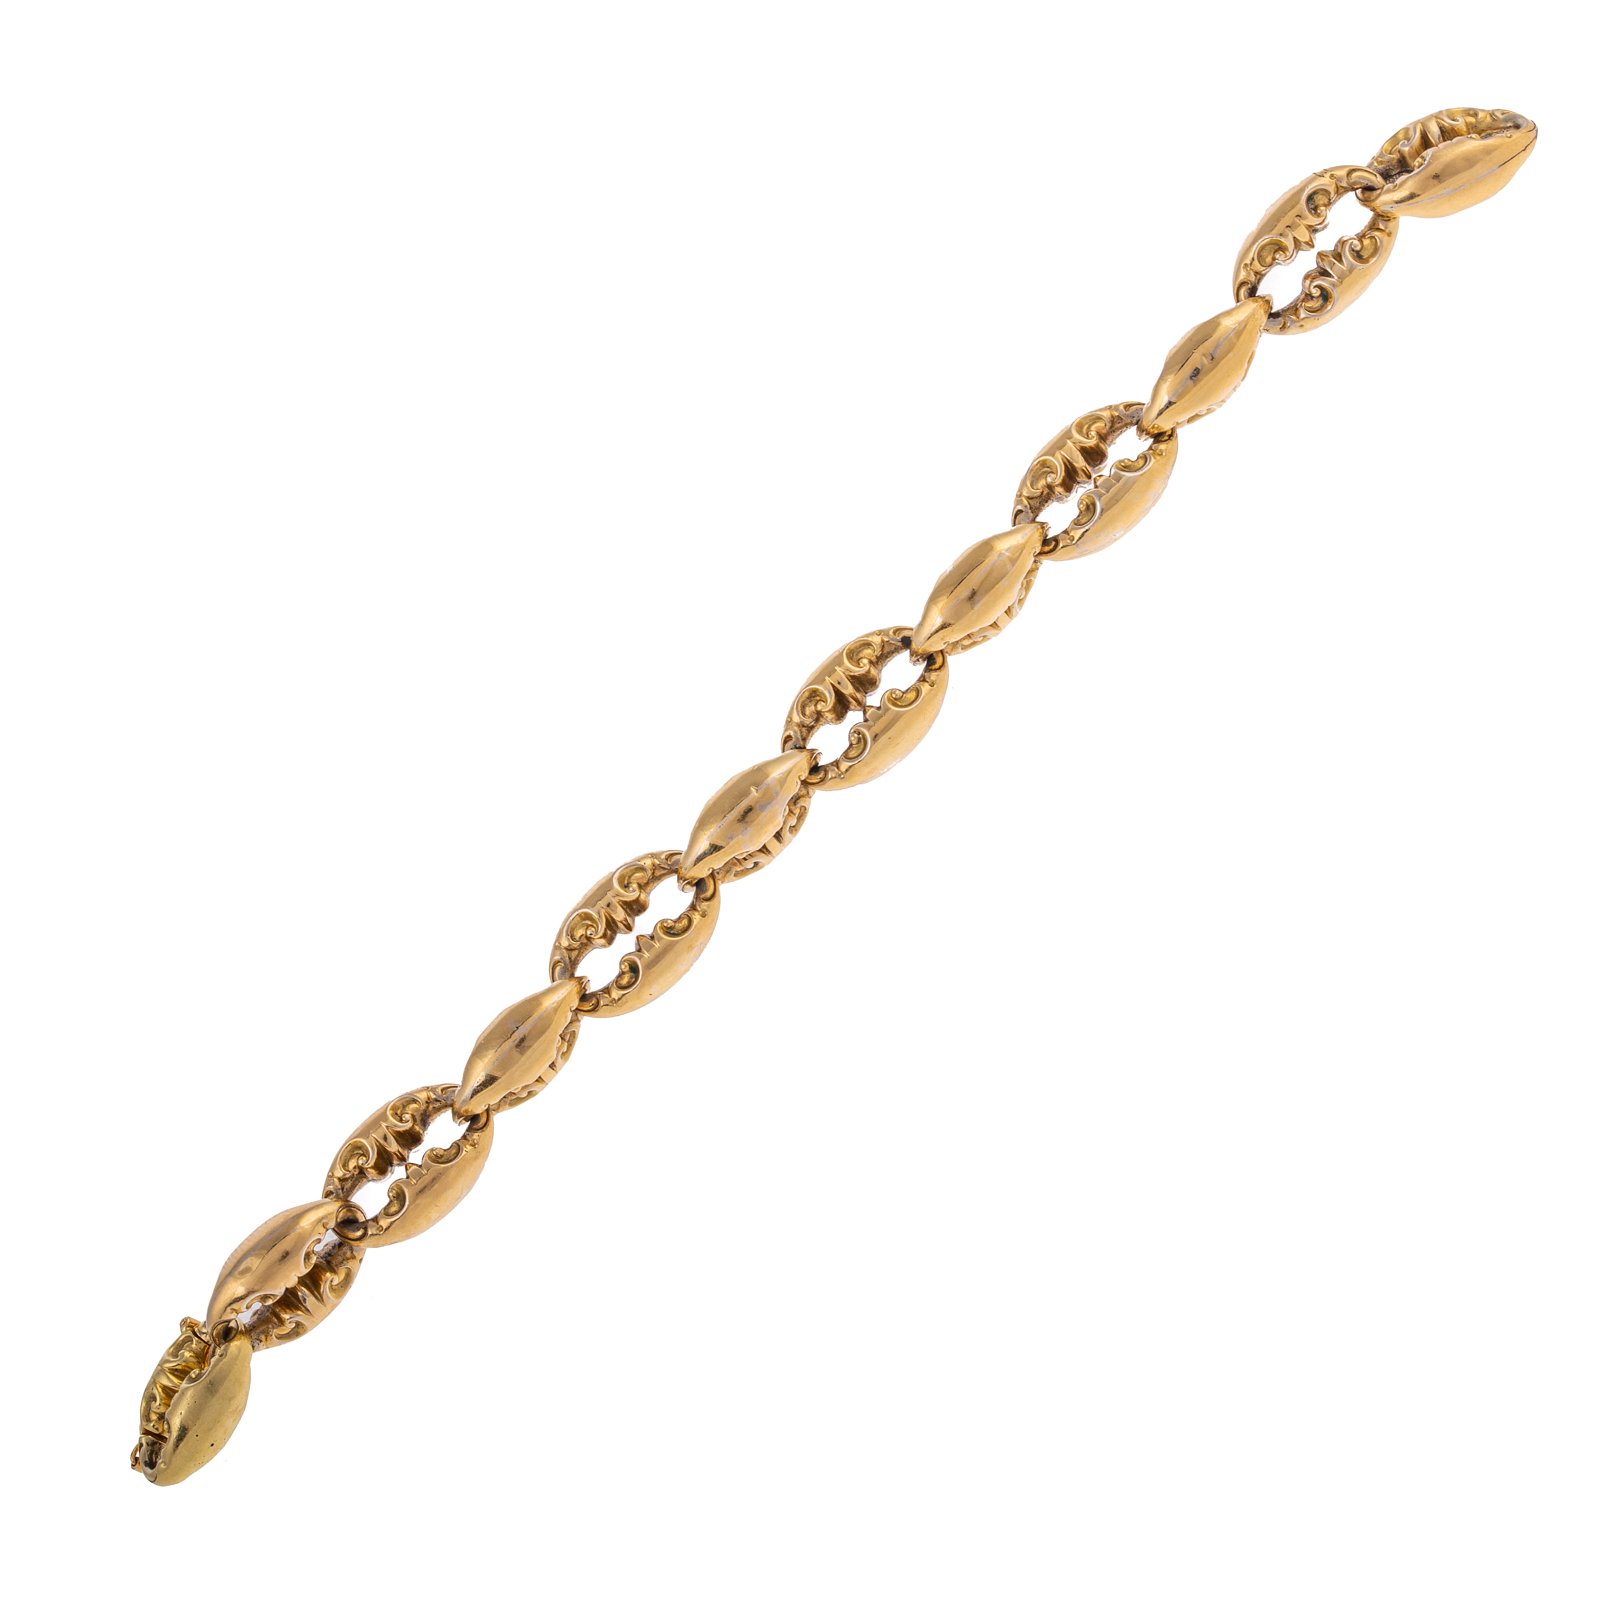 AN 18K YELLOW GOLD UNIQUE LINK